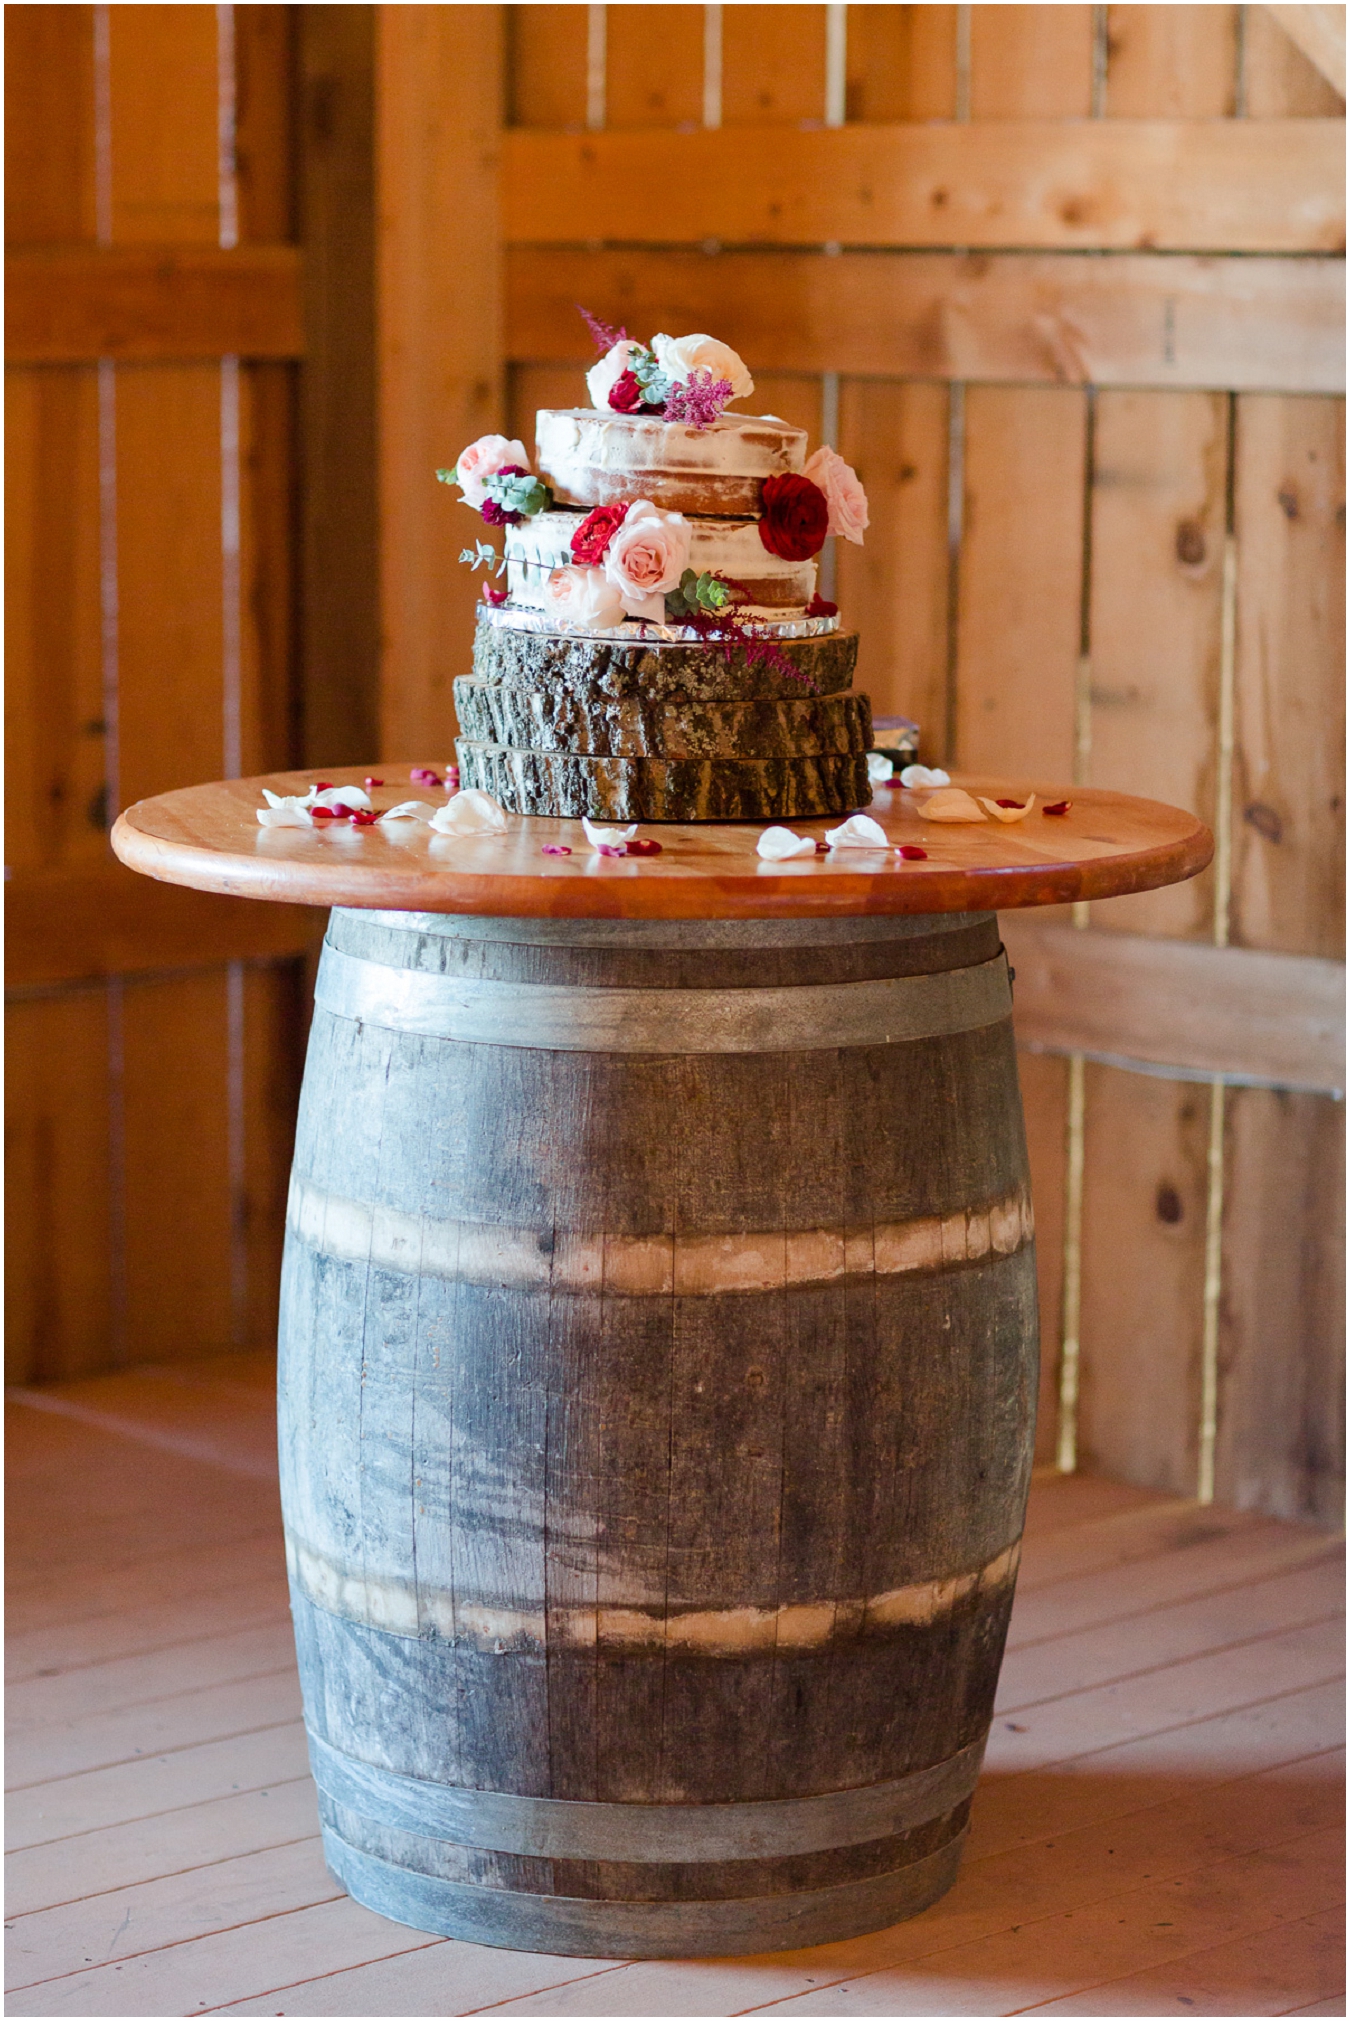 Chaumette Vineyards and Winery Wedding Ste. Genevieve Photographer Aleen and Rich wedding cake photo